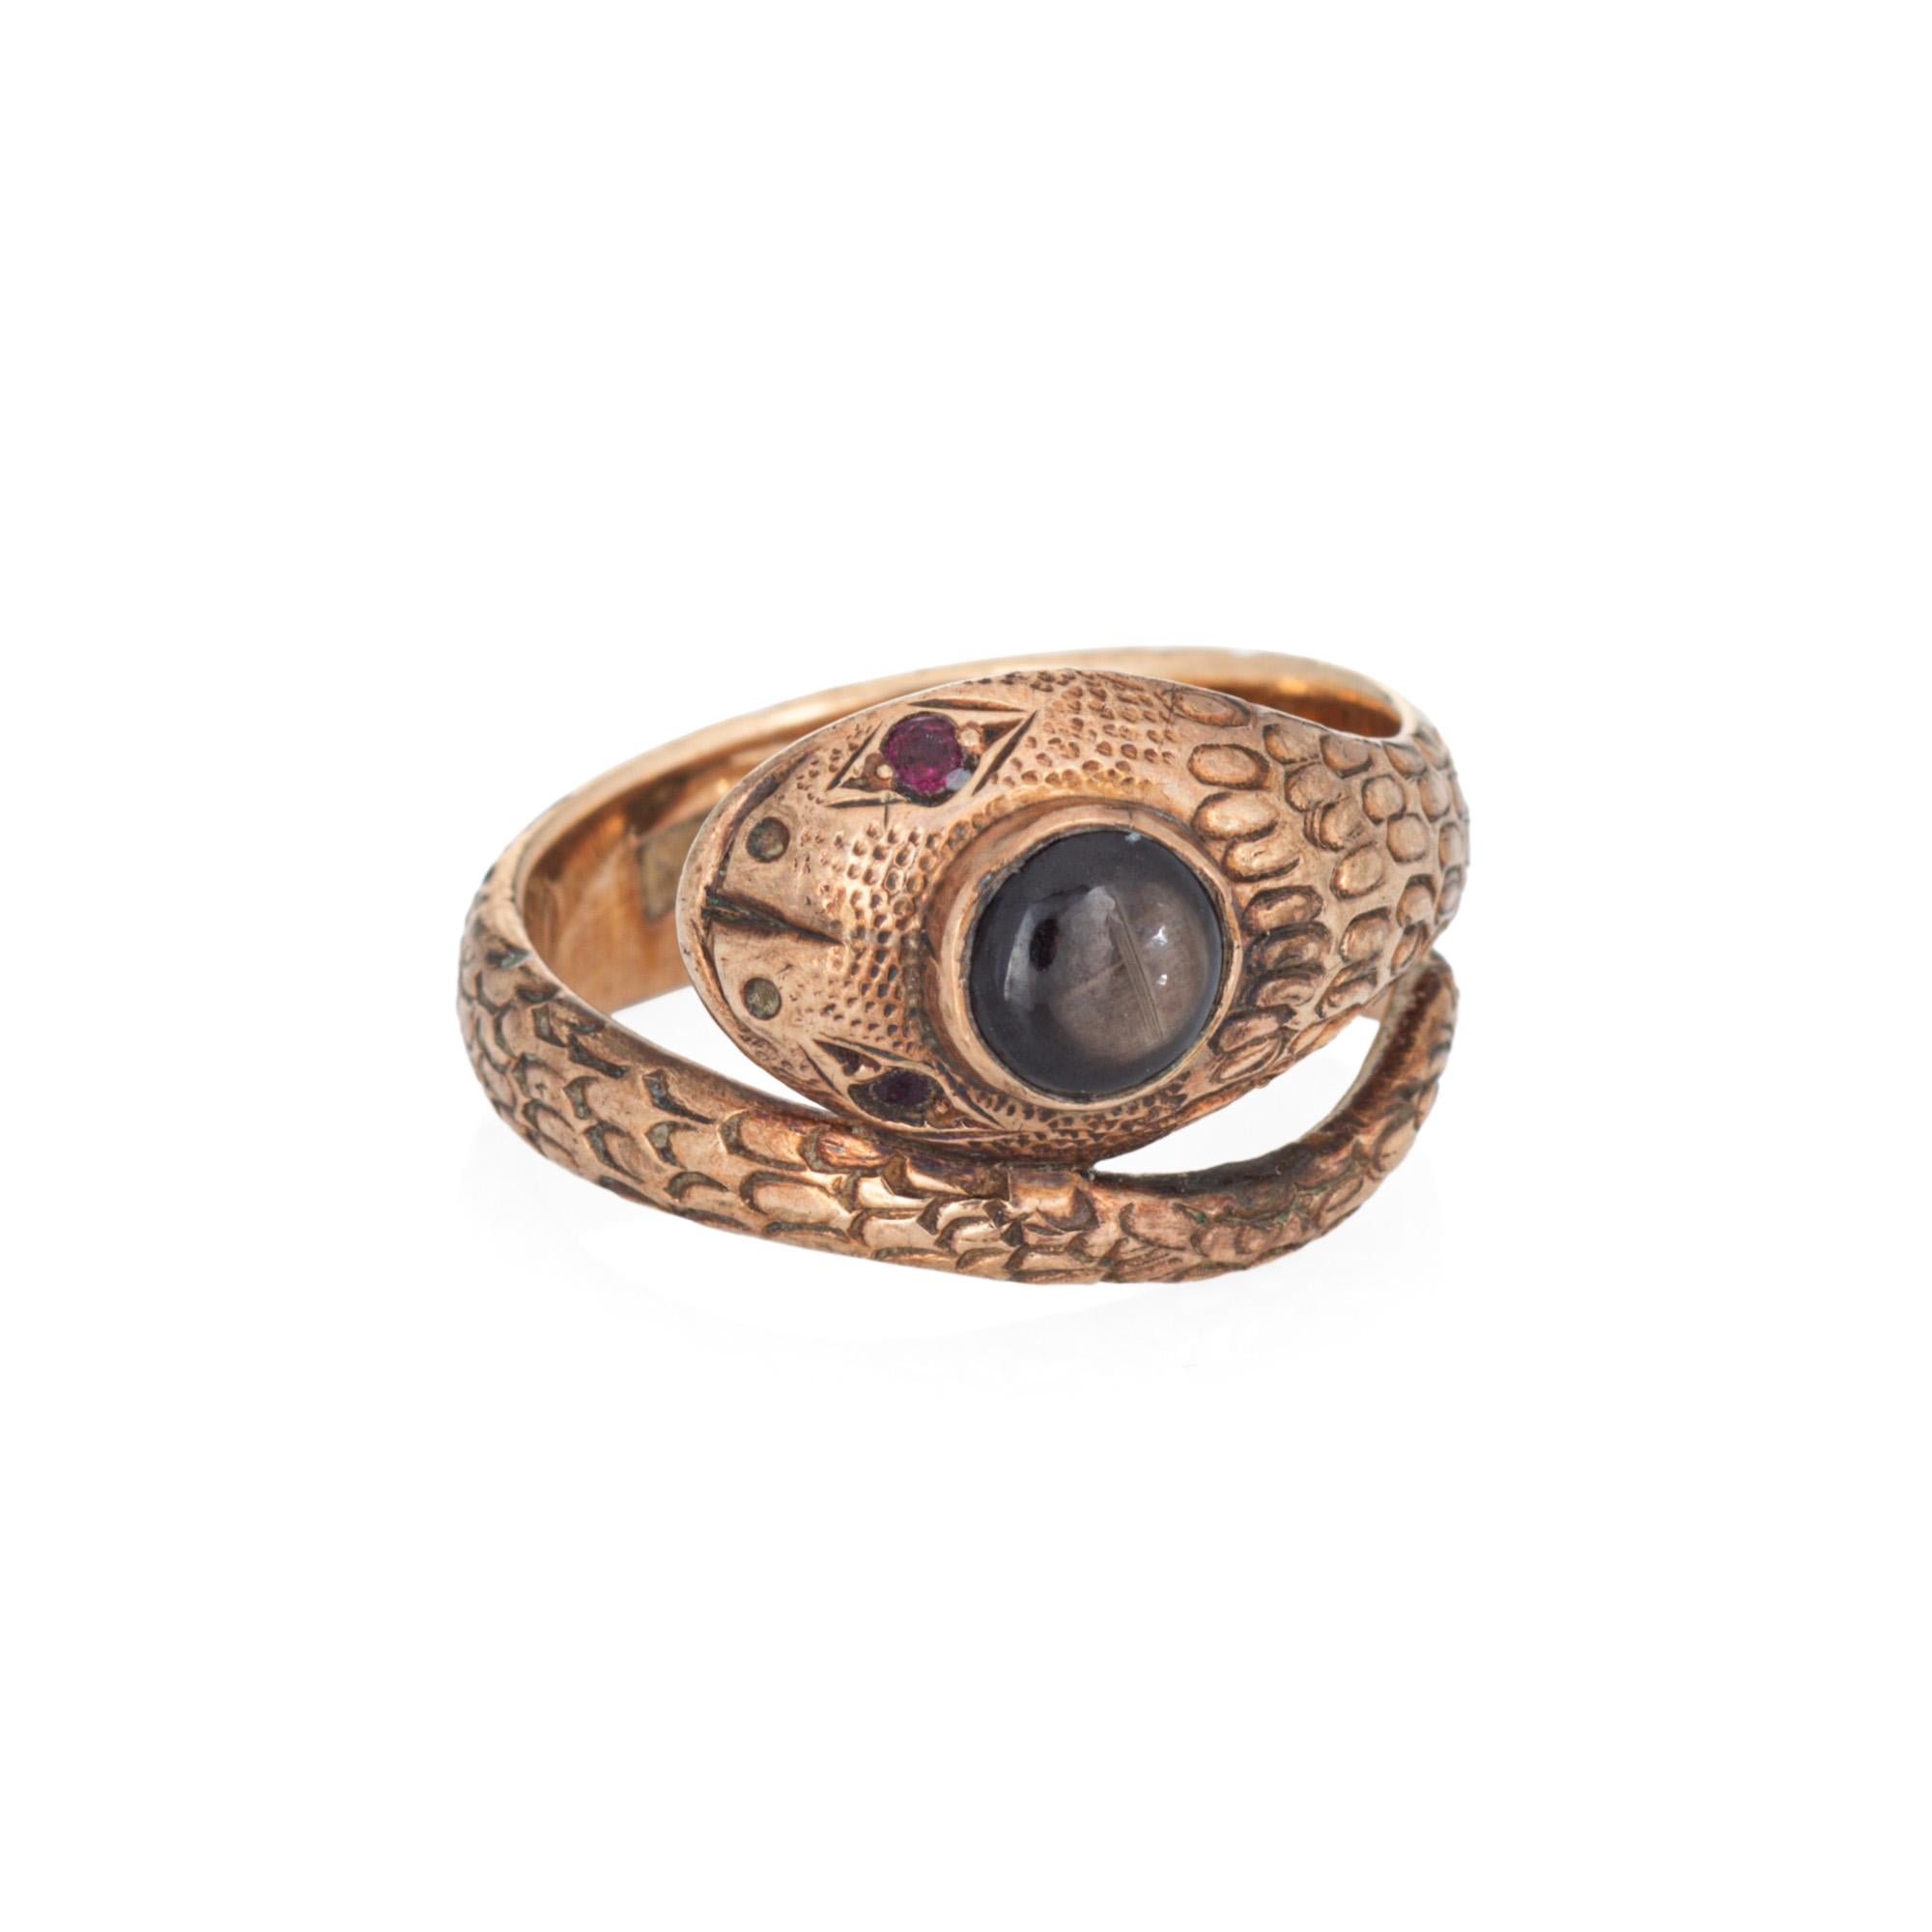 Finely detailed vintage snake ring, crafted in 14 karat rose gold (circa 1960s to 1970s). 

Star sapphire measures 4mm. Two small 1mm rubies are set into the eyes. The sapphire is in very good condition and free of cracks or chips.       

For